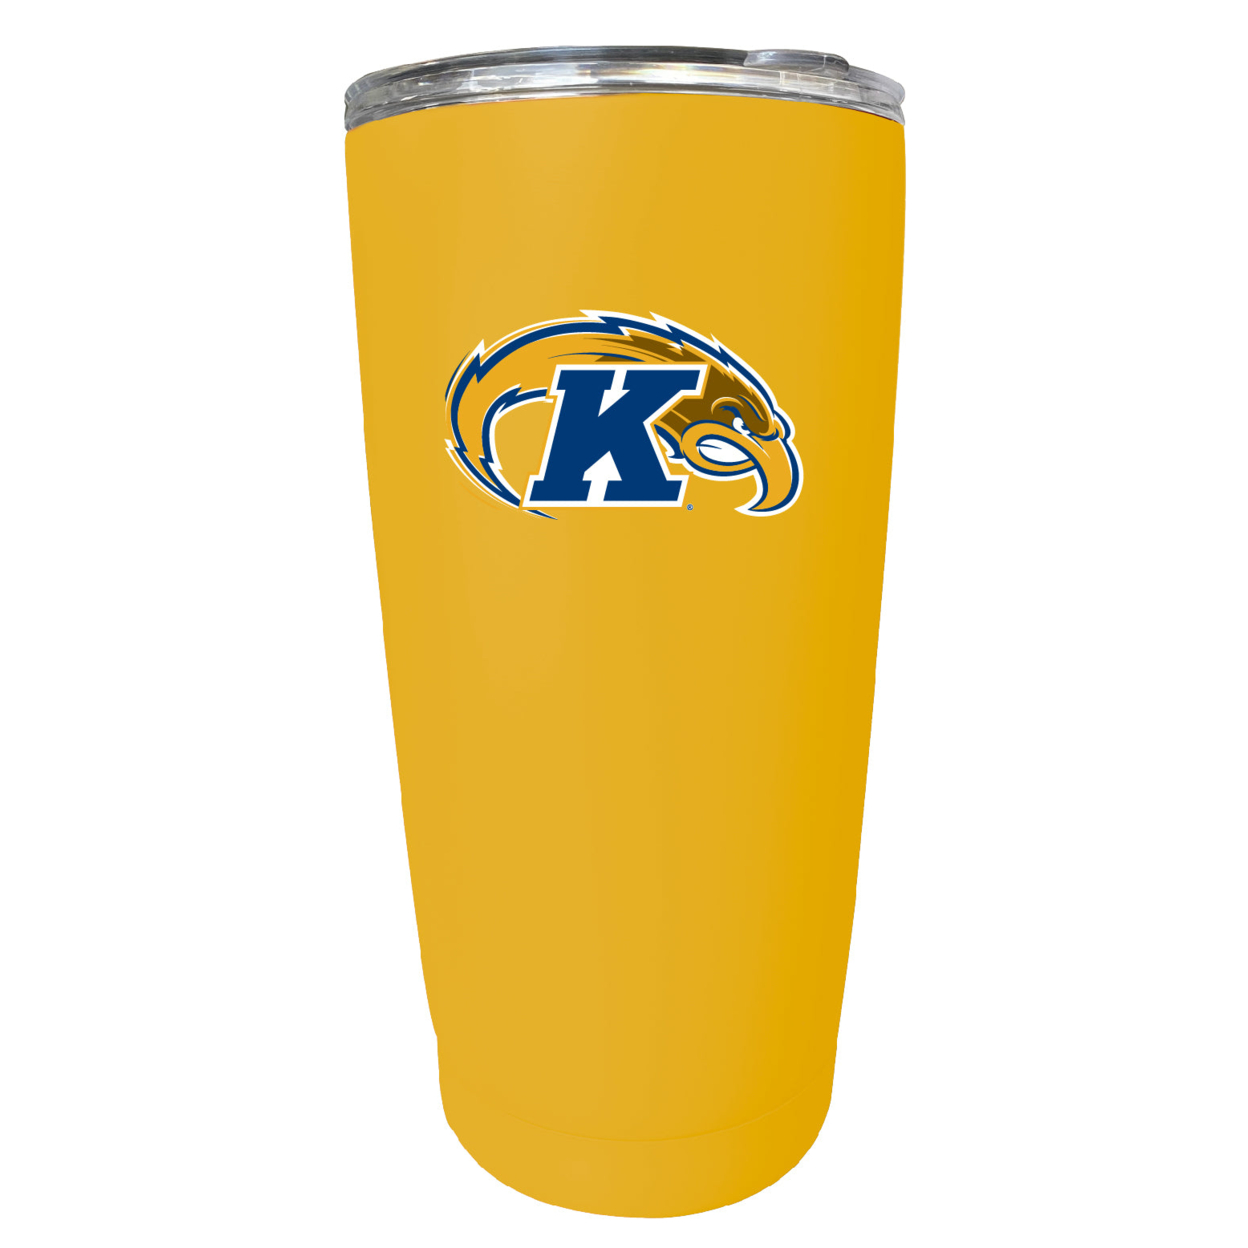 Kent State University 16 Oz Stainless Steel Insulated Tumbler - Gray